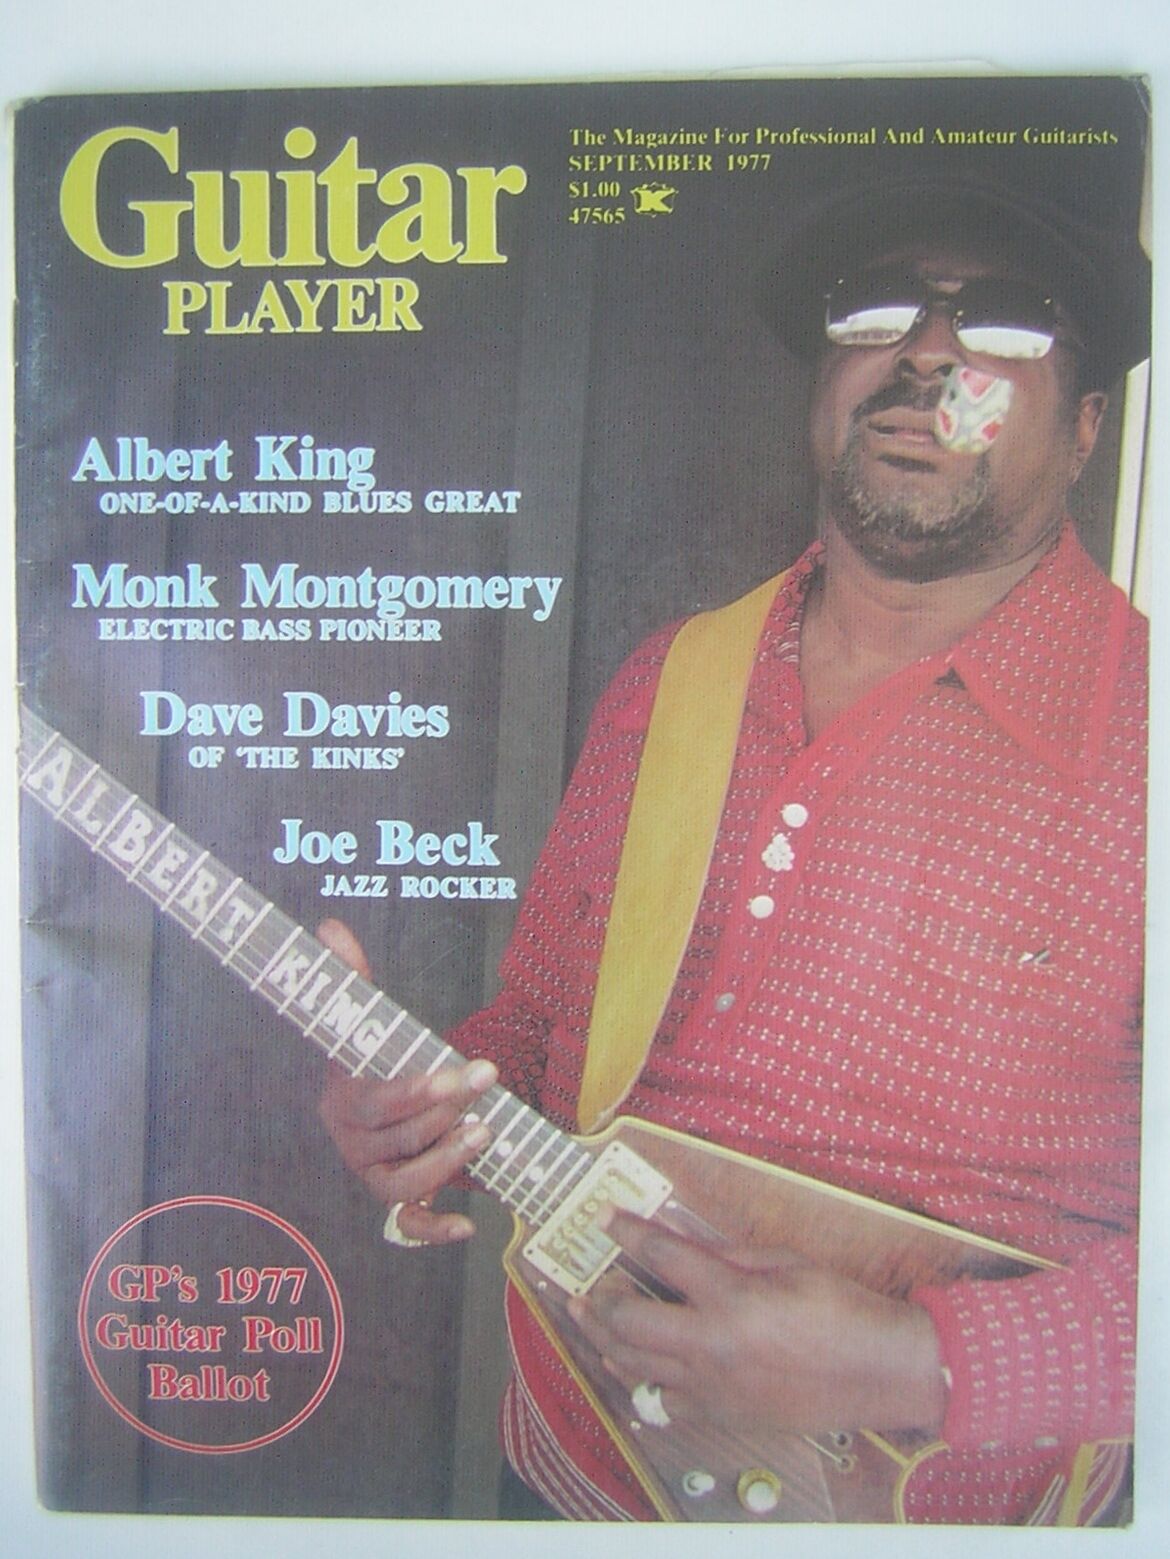 Sept., 1977 Guitar Player Magazine with Albert King Cover